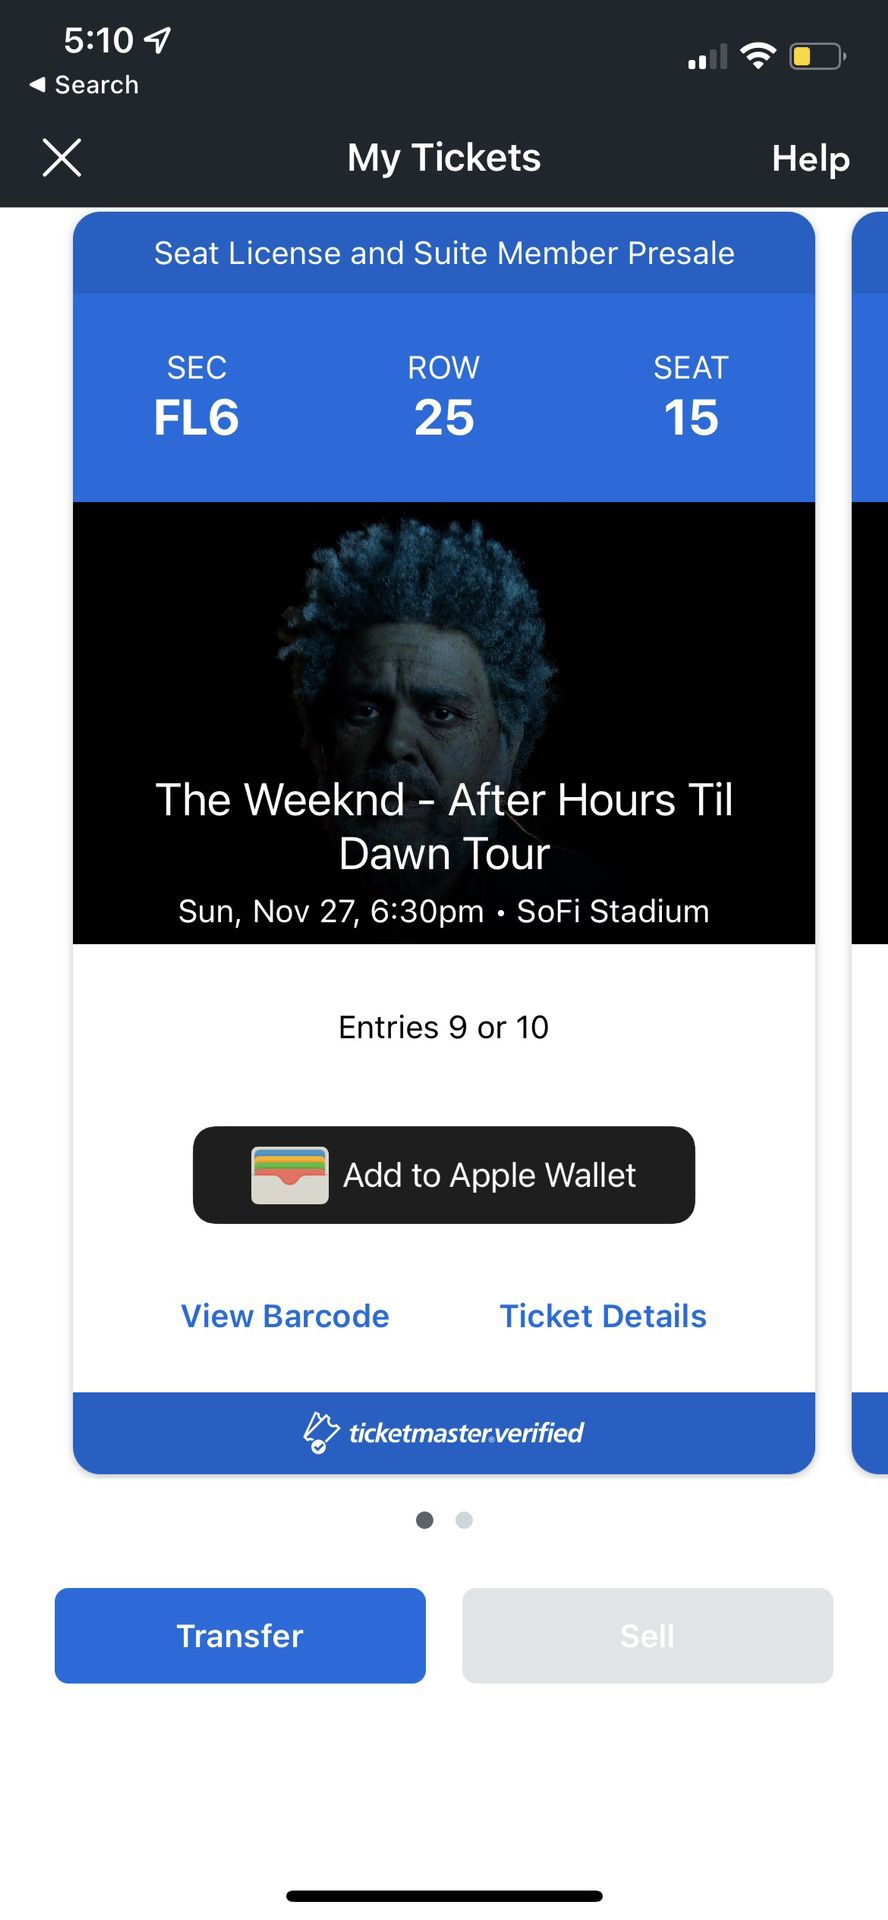 The Weeknd Concert Sunday At Sofi 